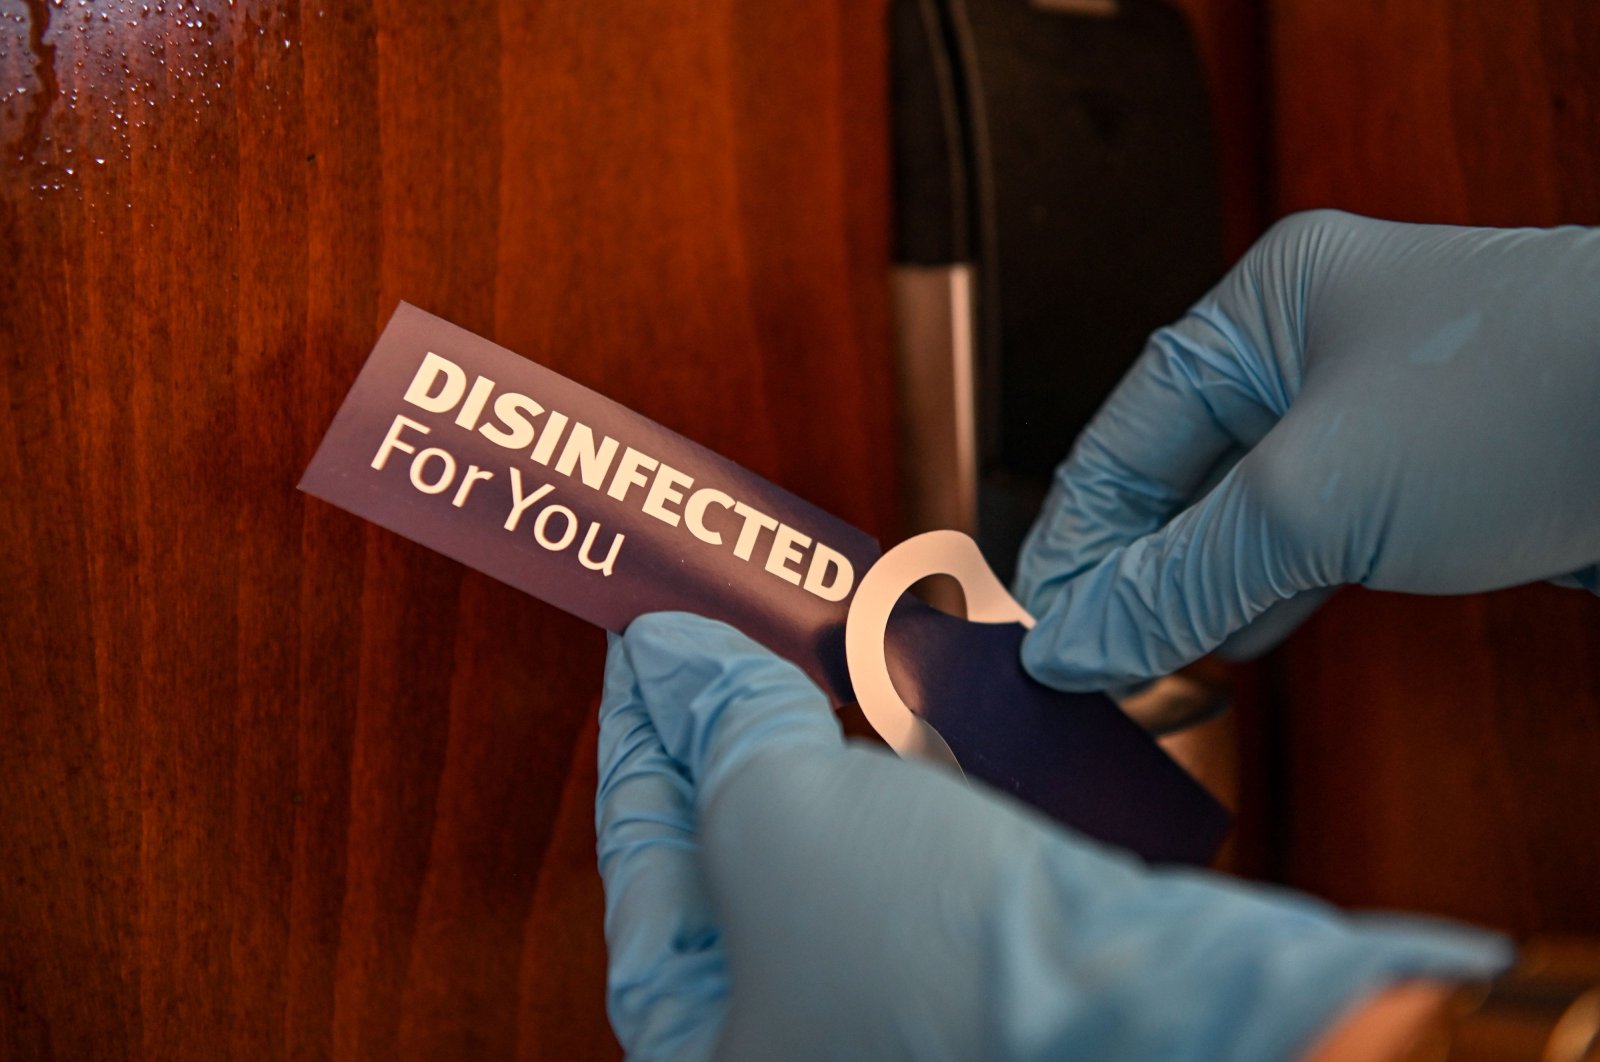 A room cleaner puts a sticker on a room's door after its disinfection at a luxury hotel in Lara district in Antalya, a popular holiday resort in southern Turkey, June 19, 2020. (AFP Photo)